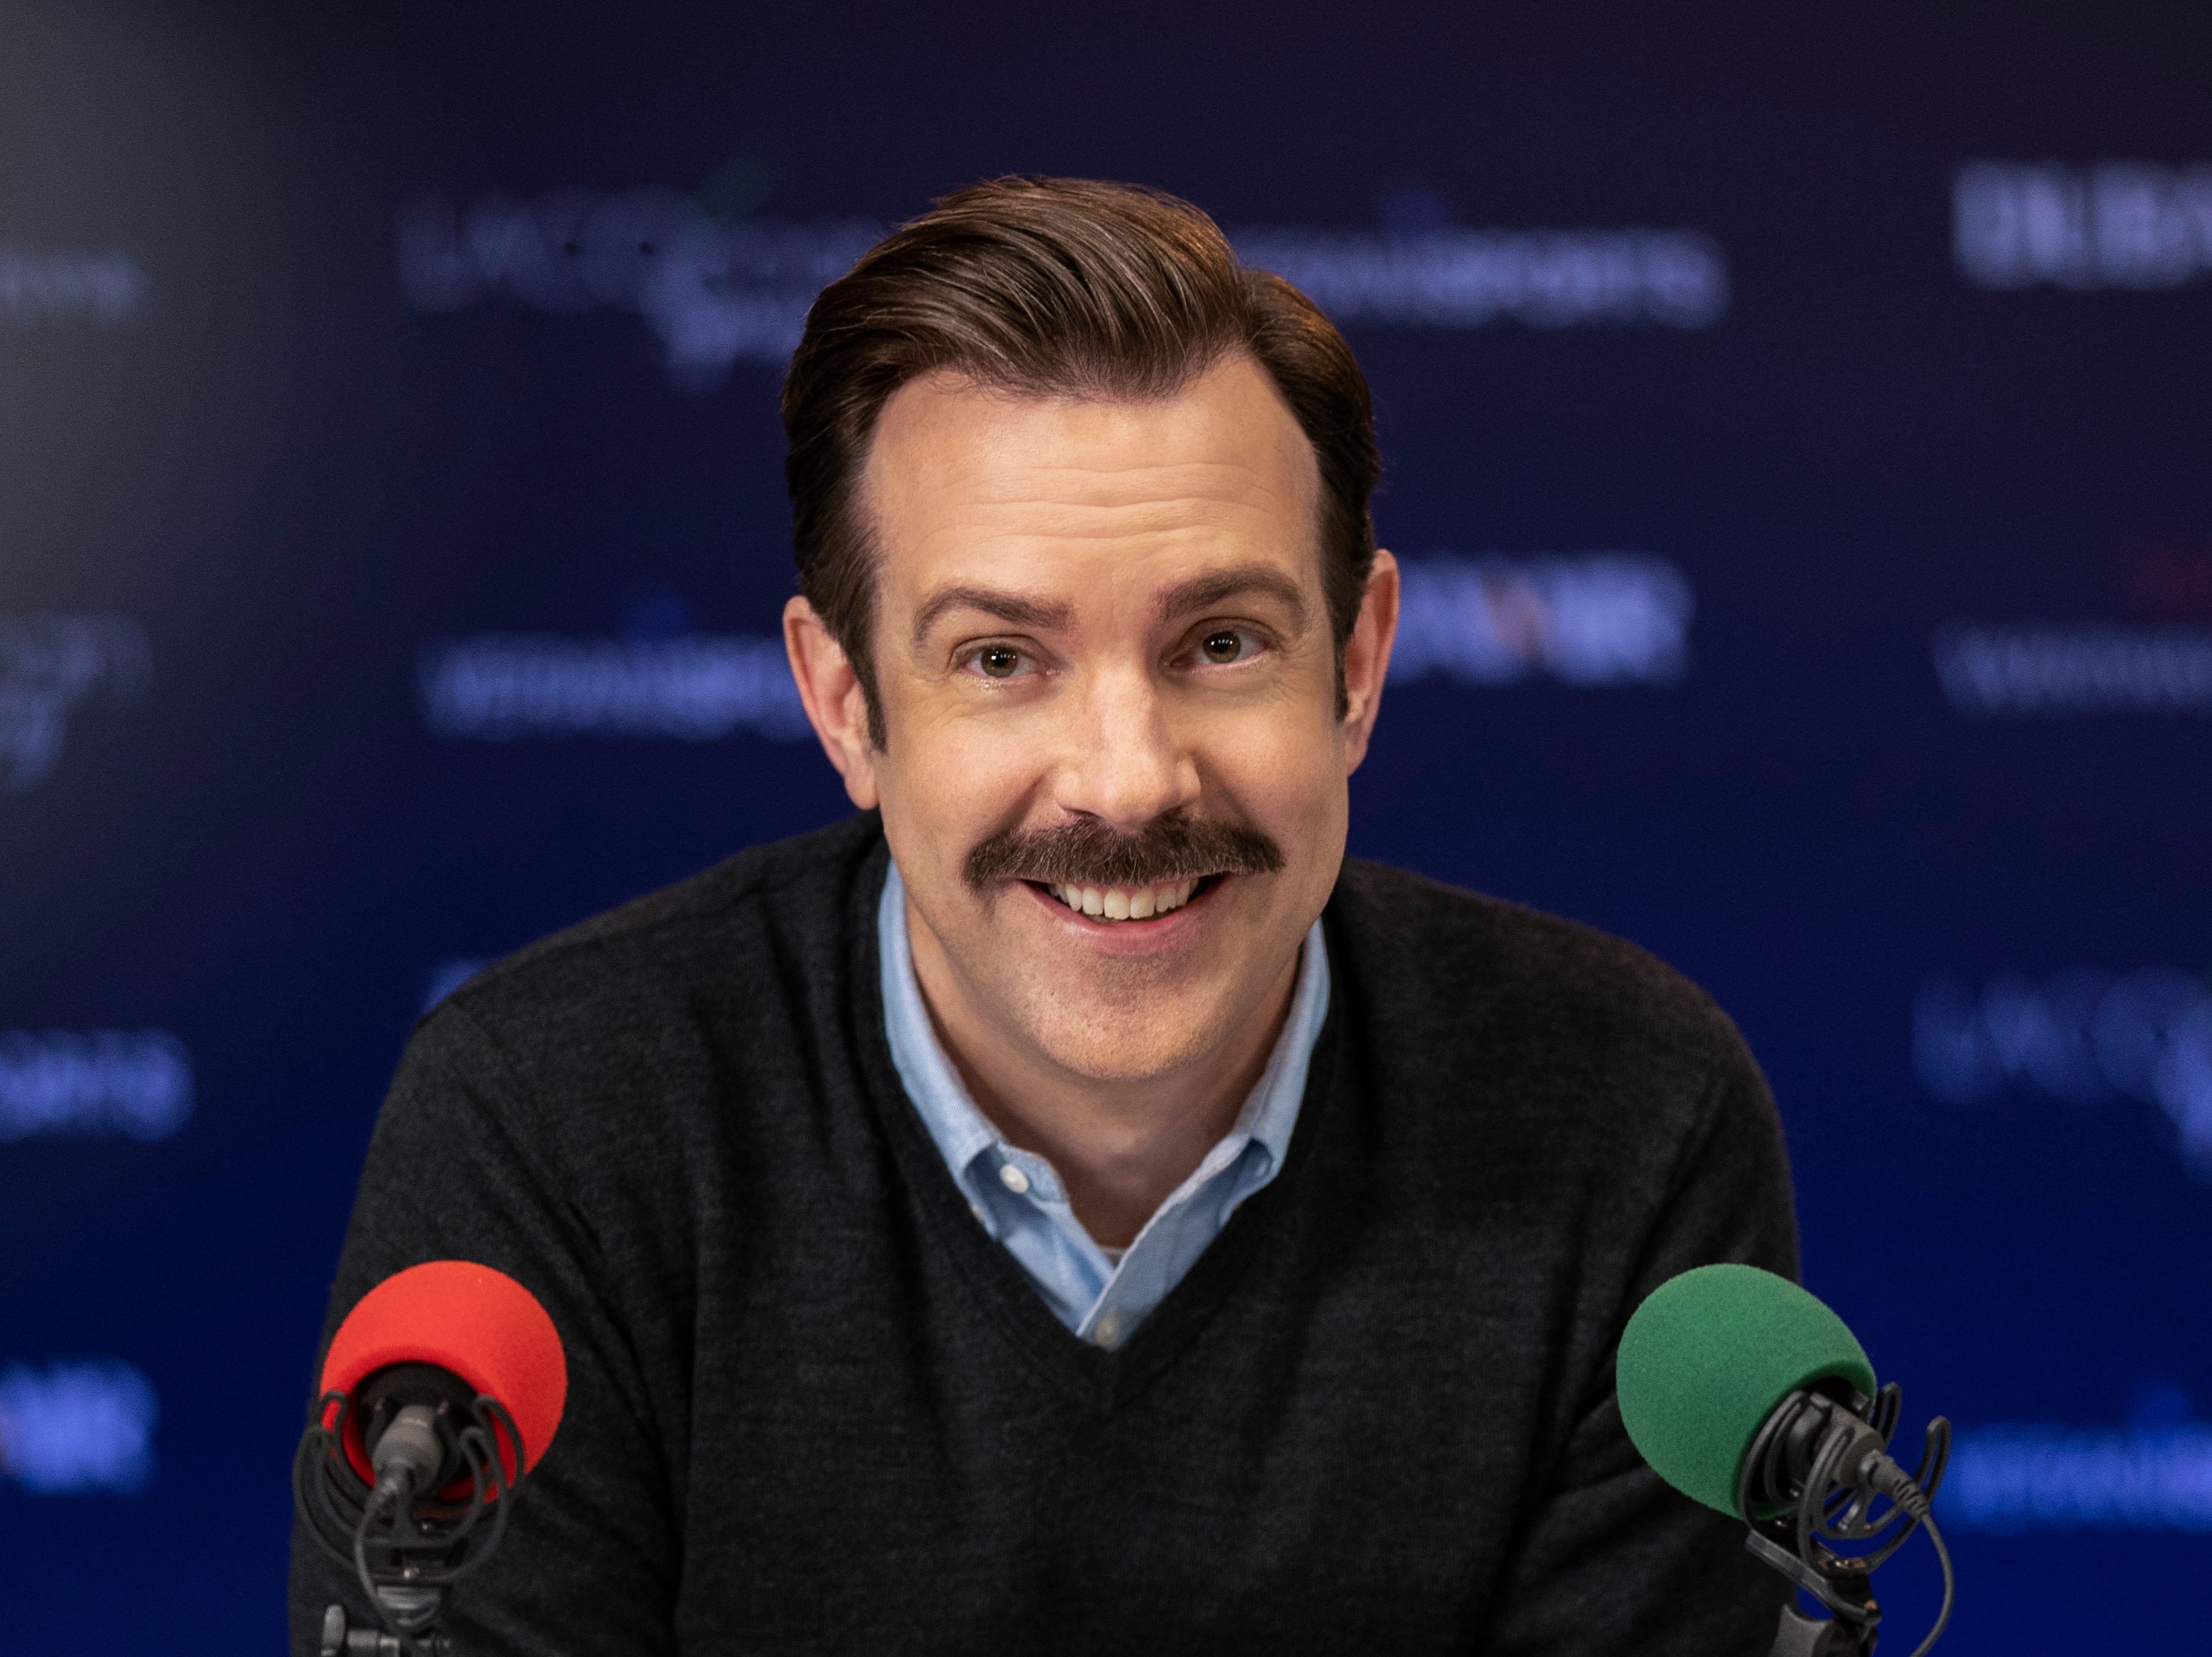 The pride of Richmond: Jason Sudiekis won an Emmy for his lead role in the genial sports sitcom ‘Ted Lasso'